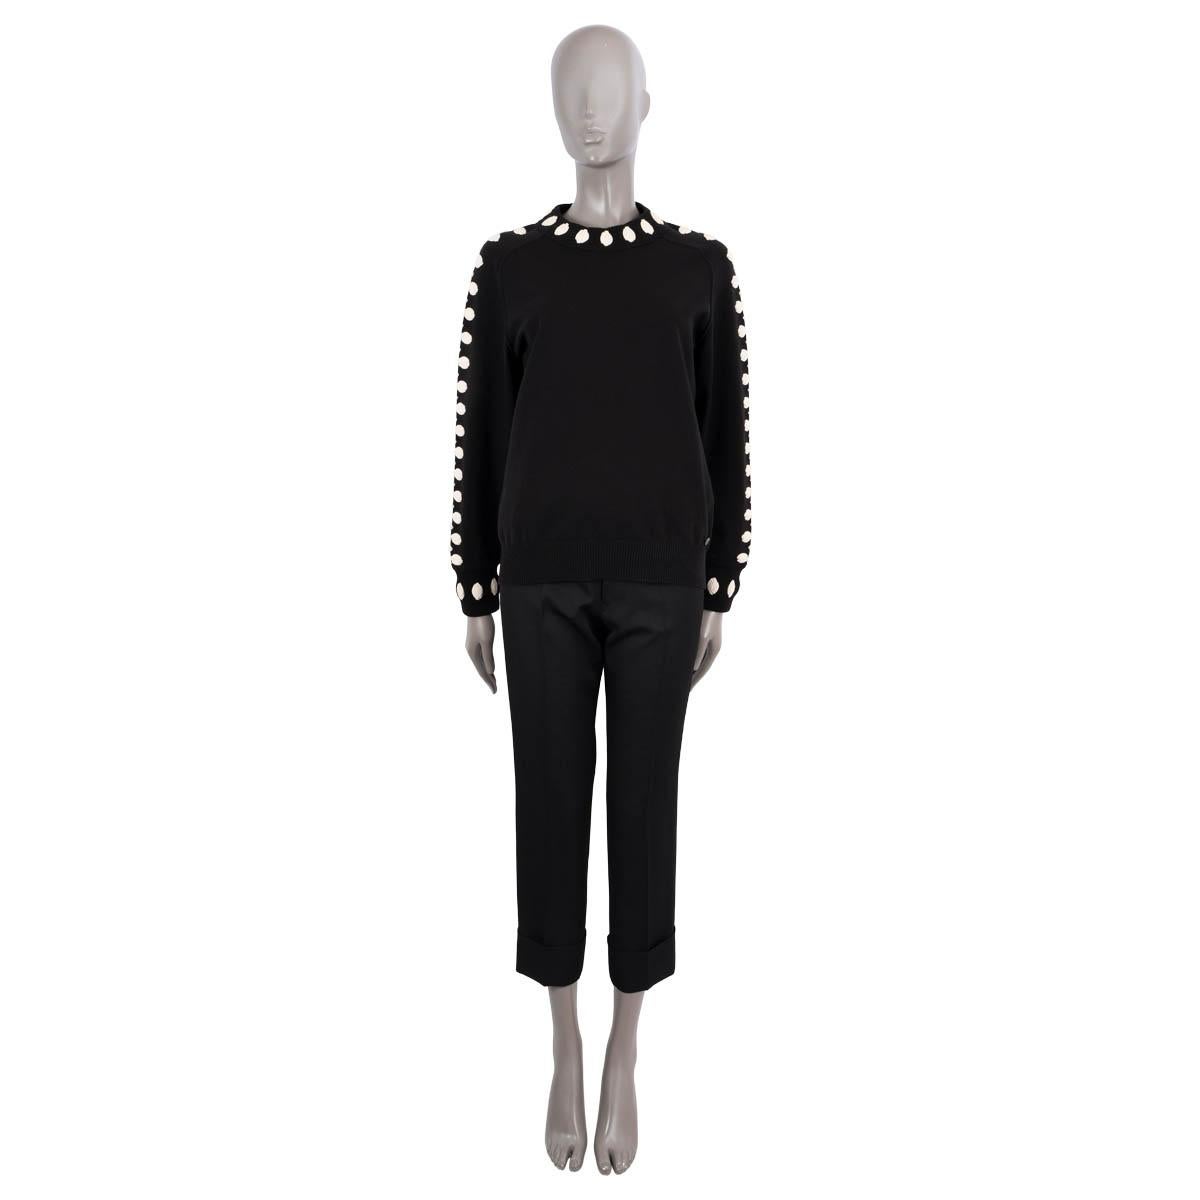 100% authentic Chanel knit sweater in black wool (76%), polyester (18%) and rayon (1%). Features ivory camellia applications, a logo button on the front and  ribbed cuffs. Unlined. Has been worn and is in excellent condition.

2015